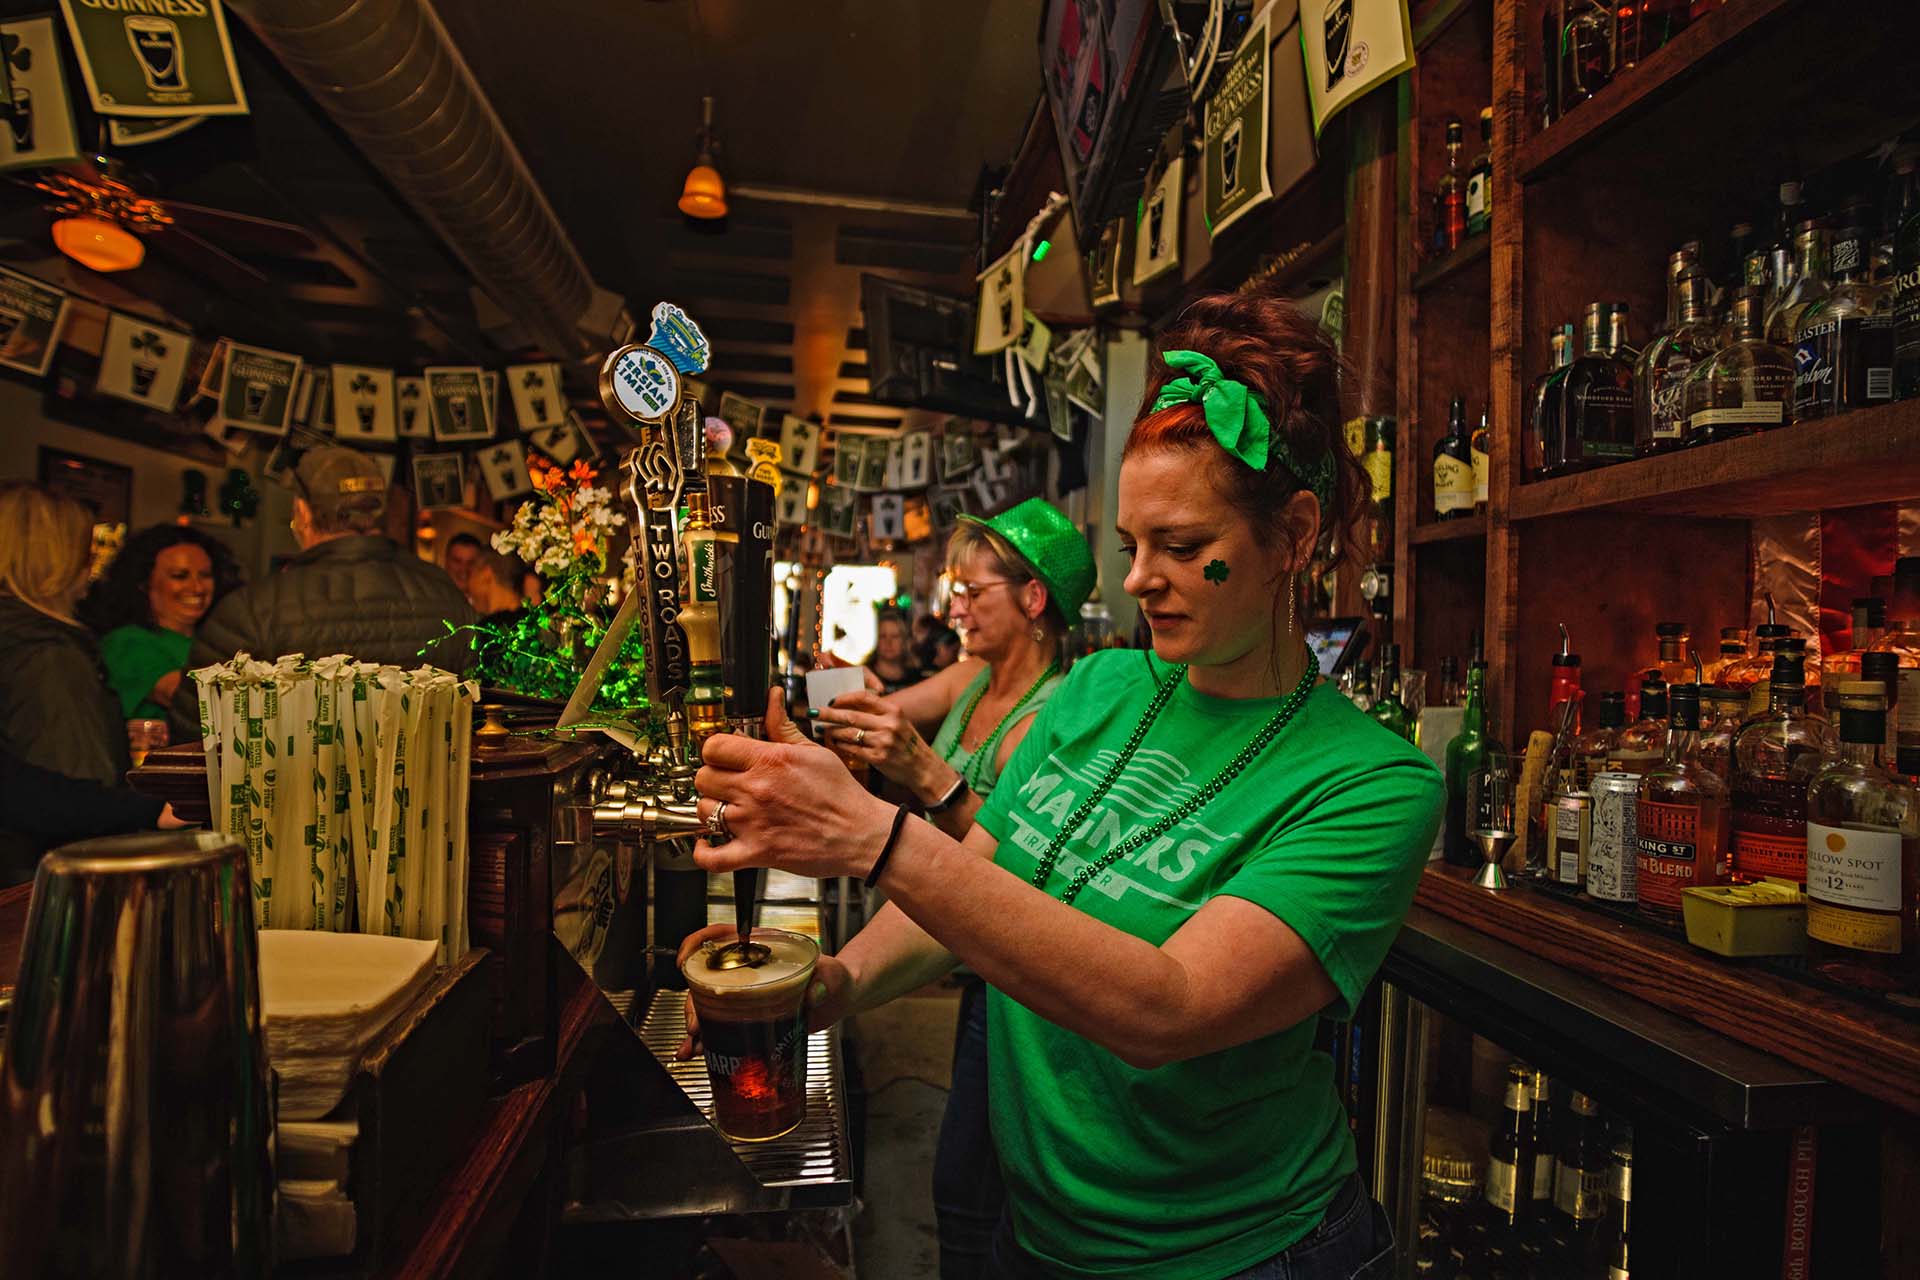 Celebrate St. Patrick's Day in CT at one of these Irish pubs